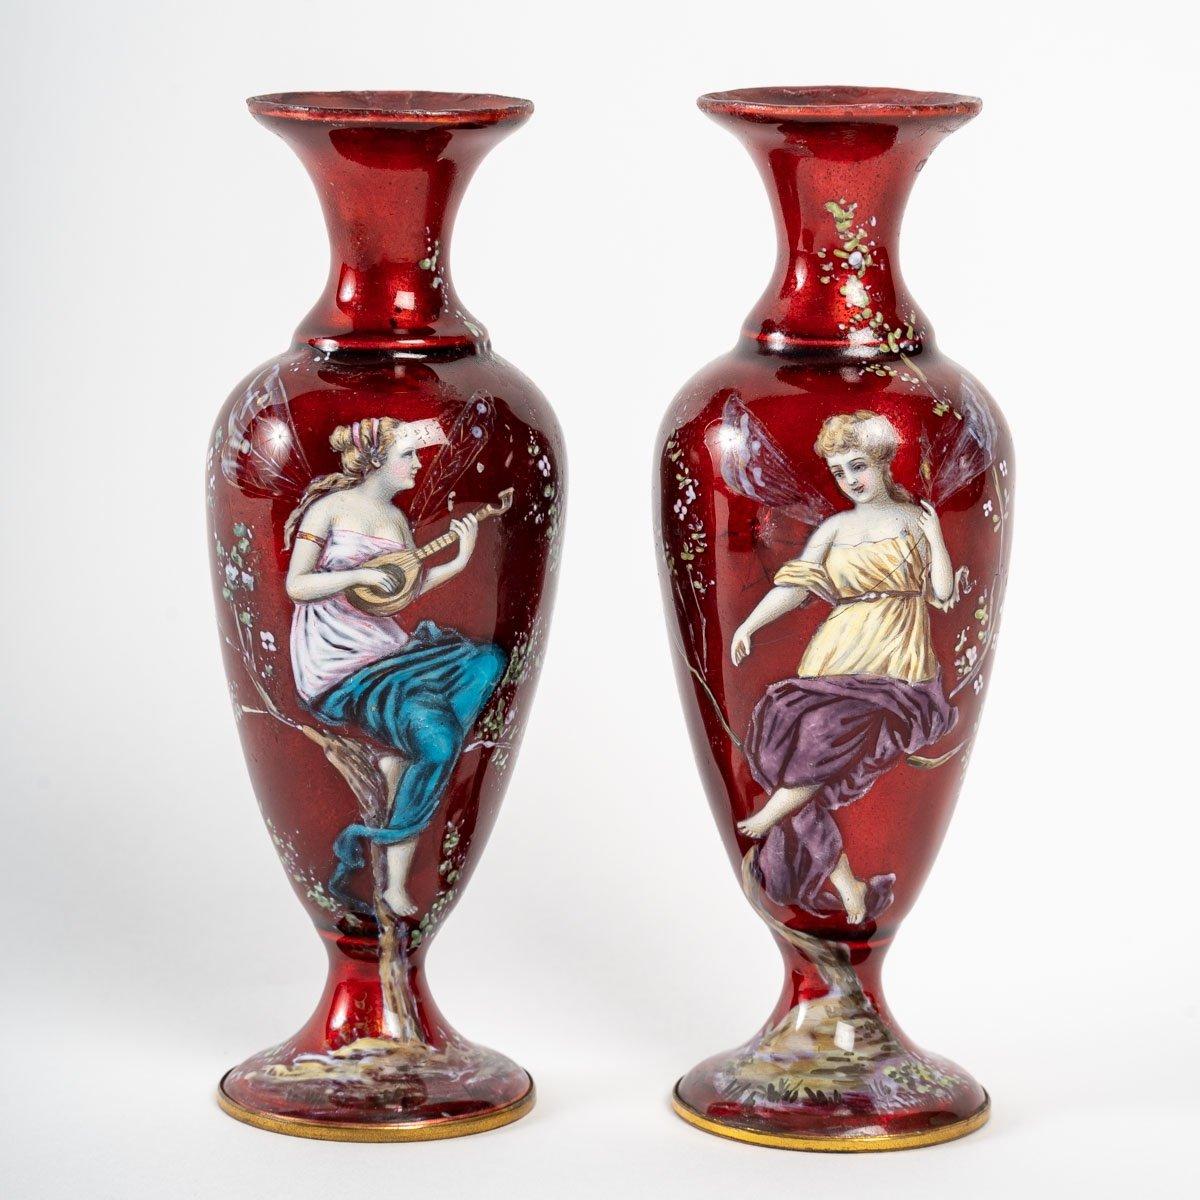 Pair of red enamel vases with Polychrome Painting, Art Nouveau style, late 19th century.